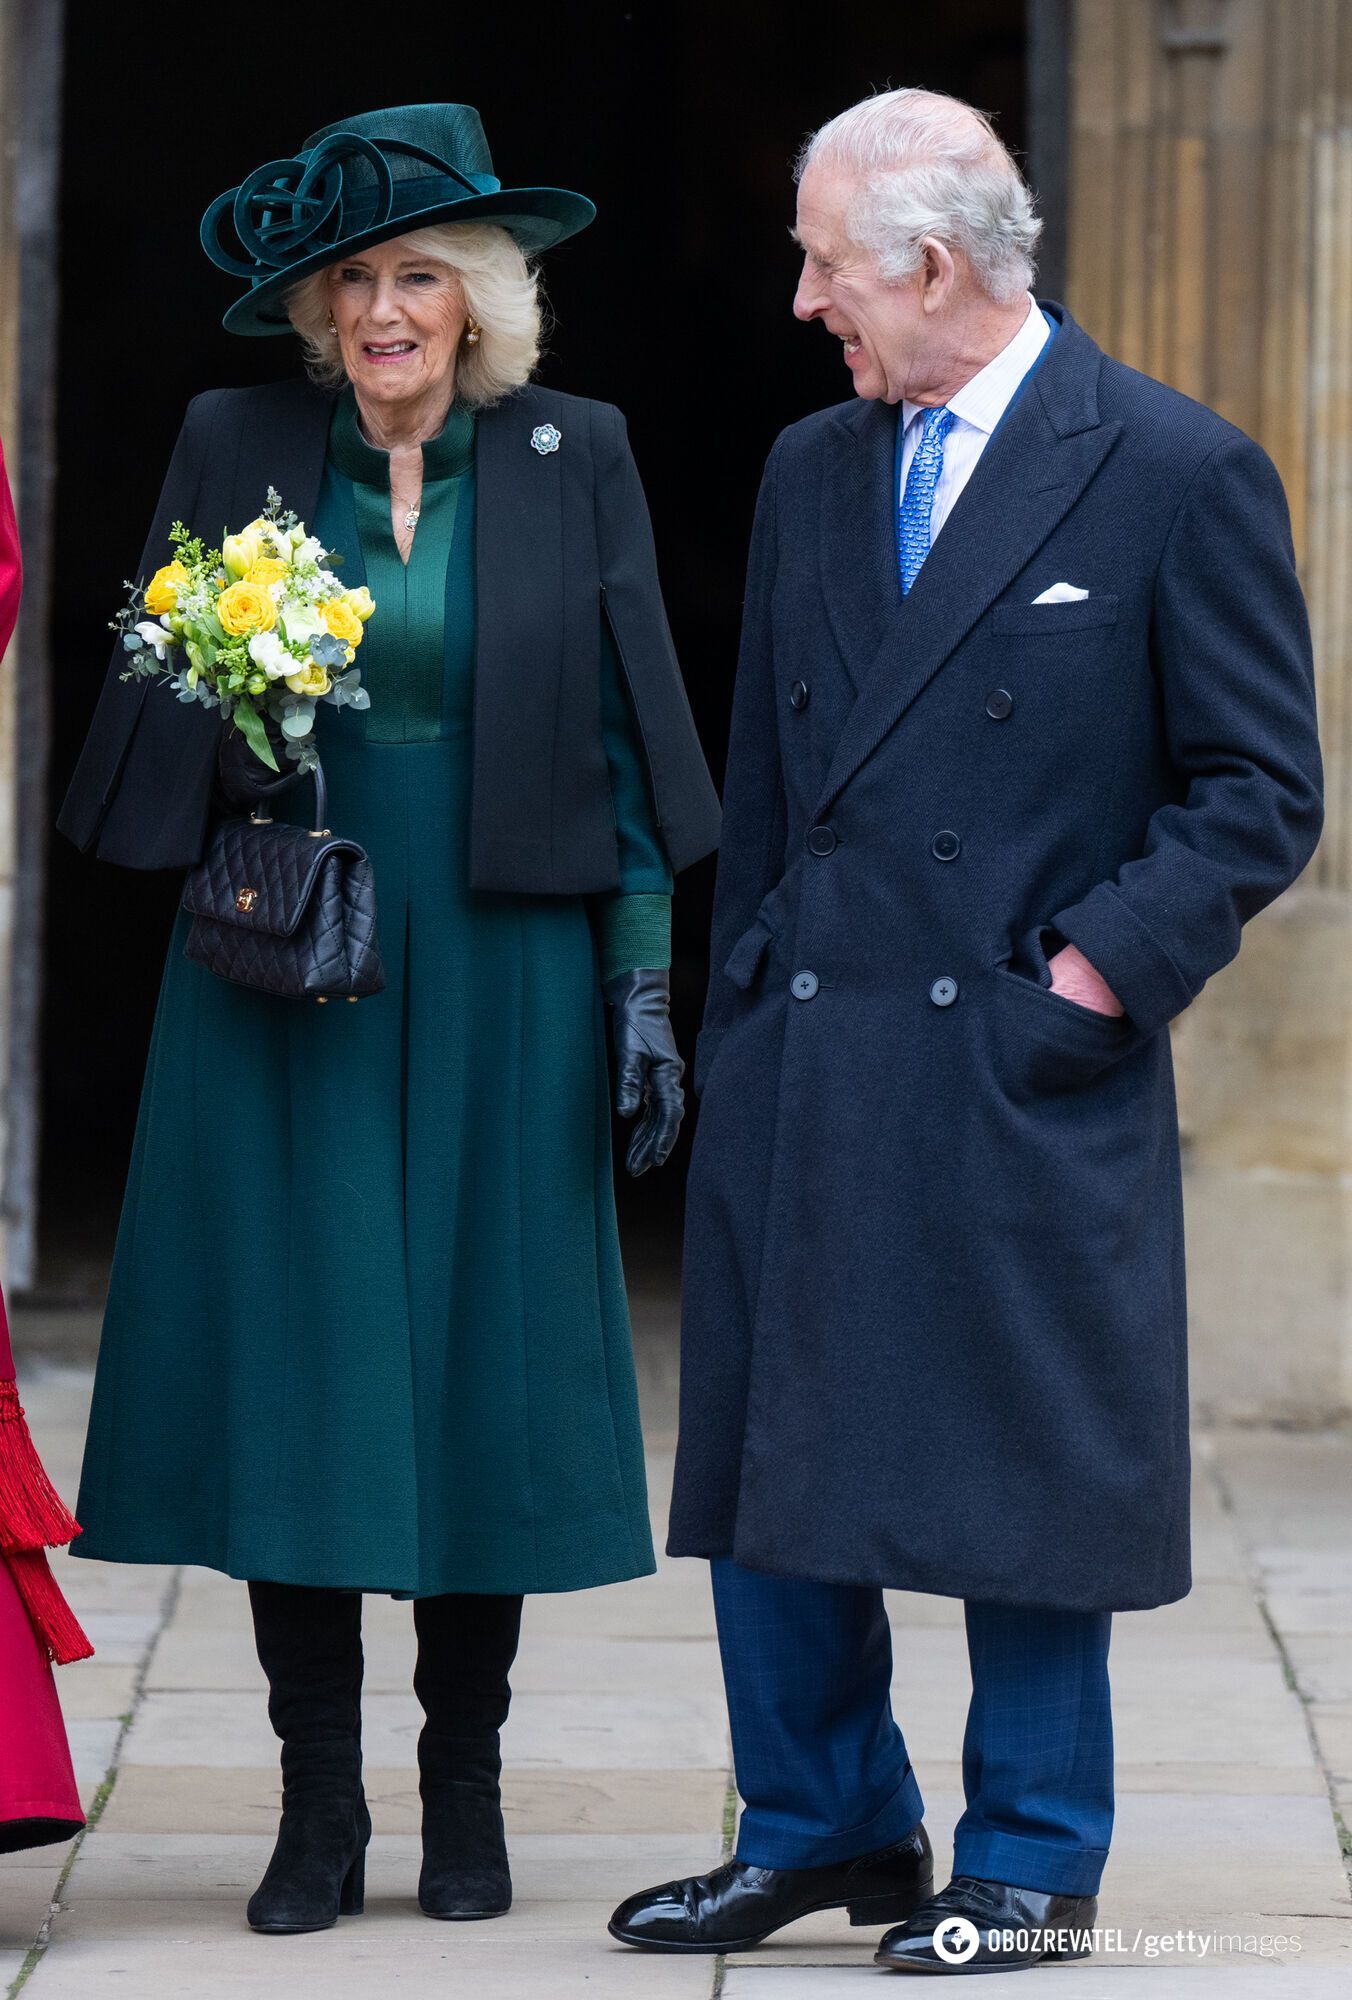 Against the backdrop of Kate Middleton and Charles III's cancer. What the royals' outfits symbolize at the Easter service at Windsor Castle